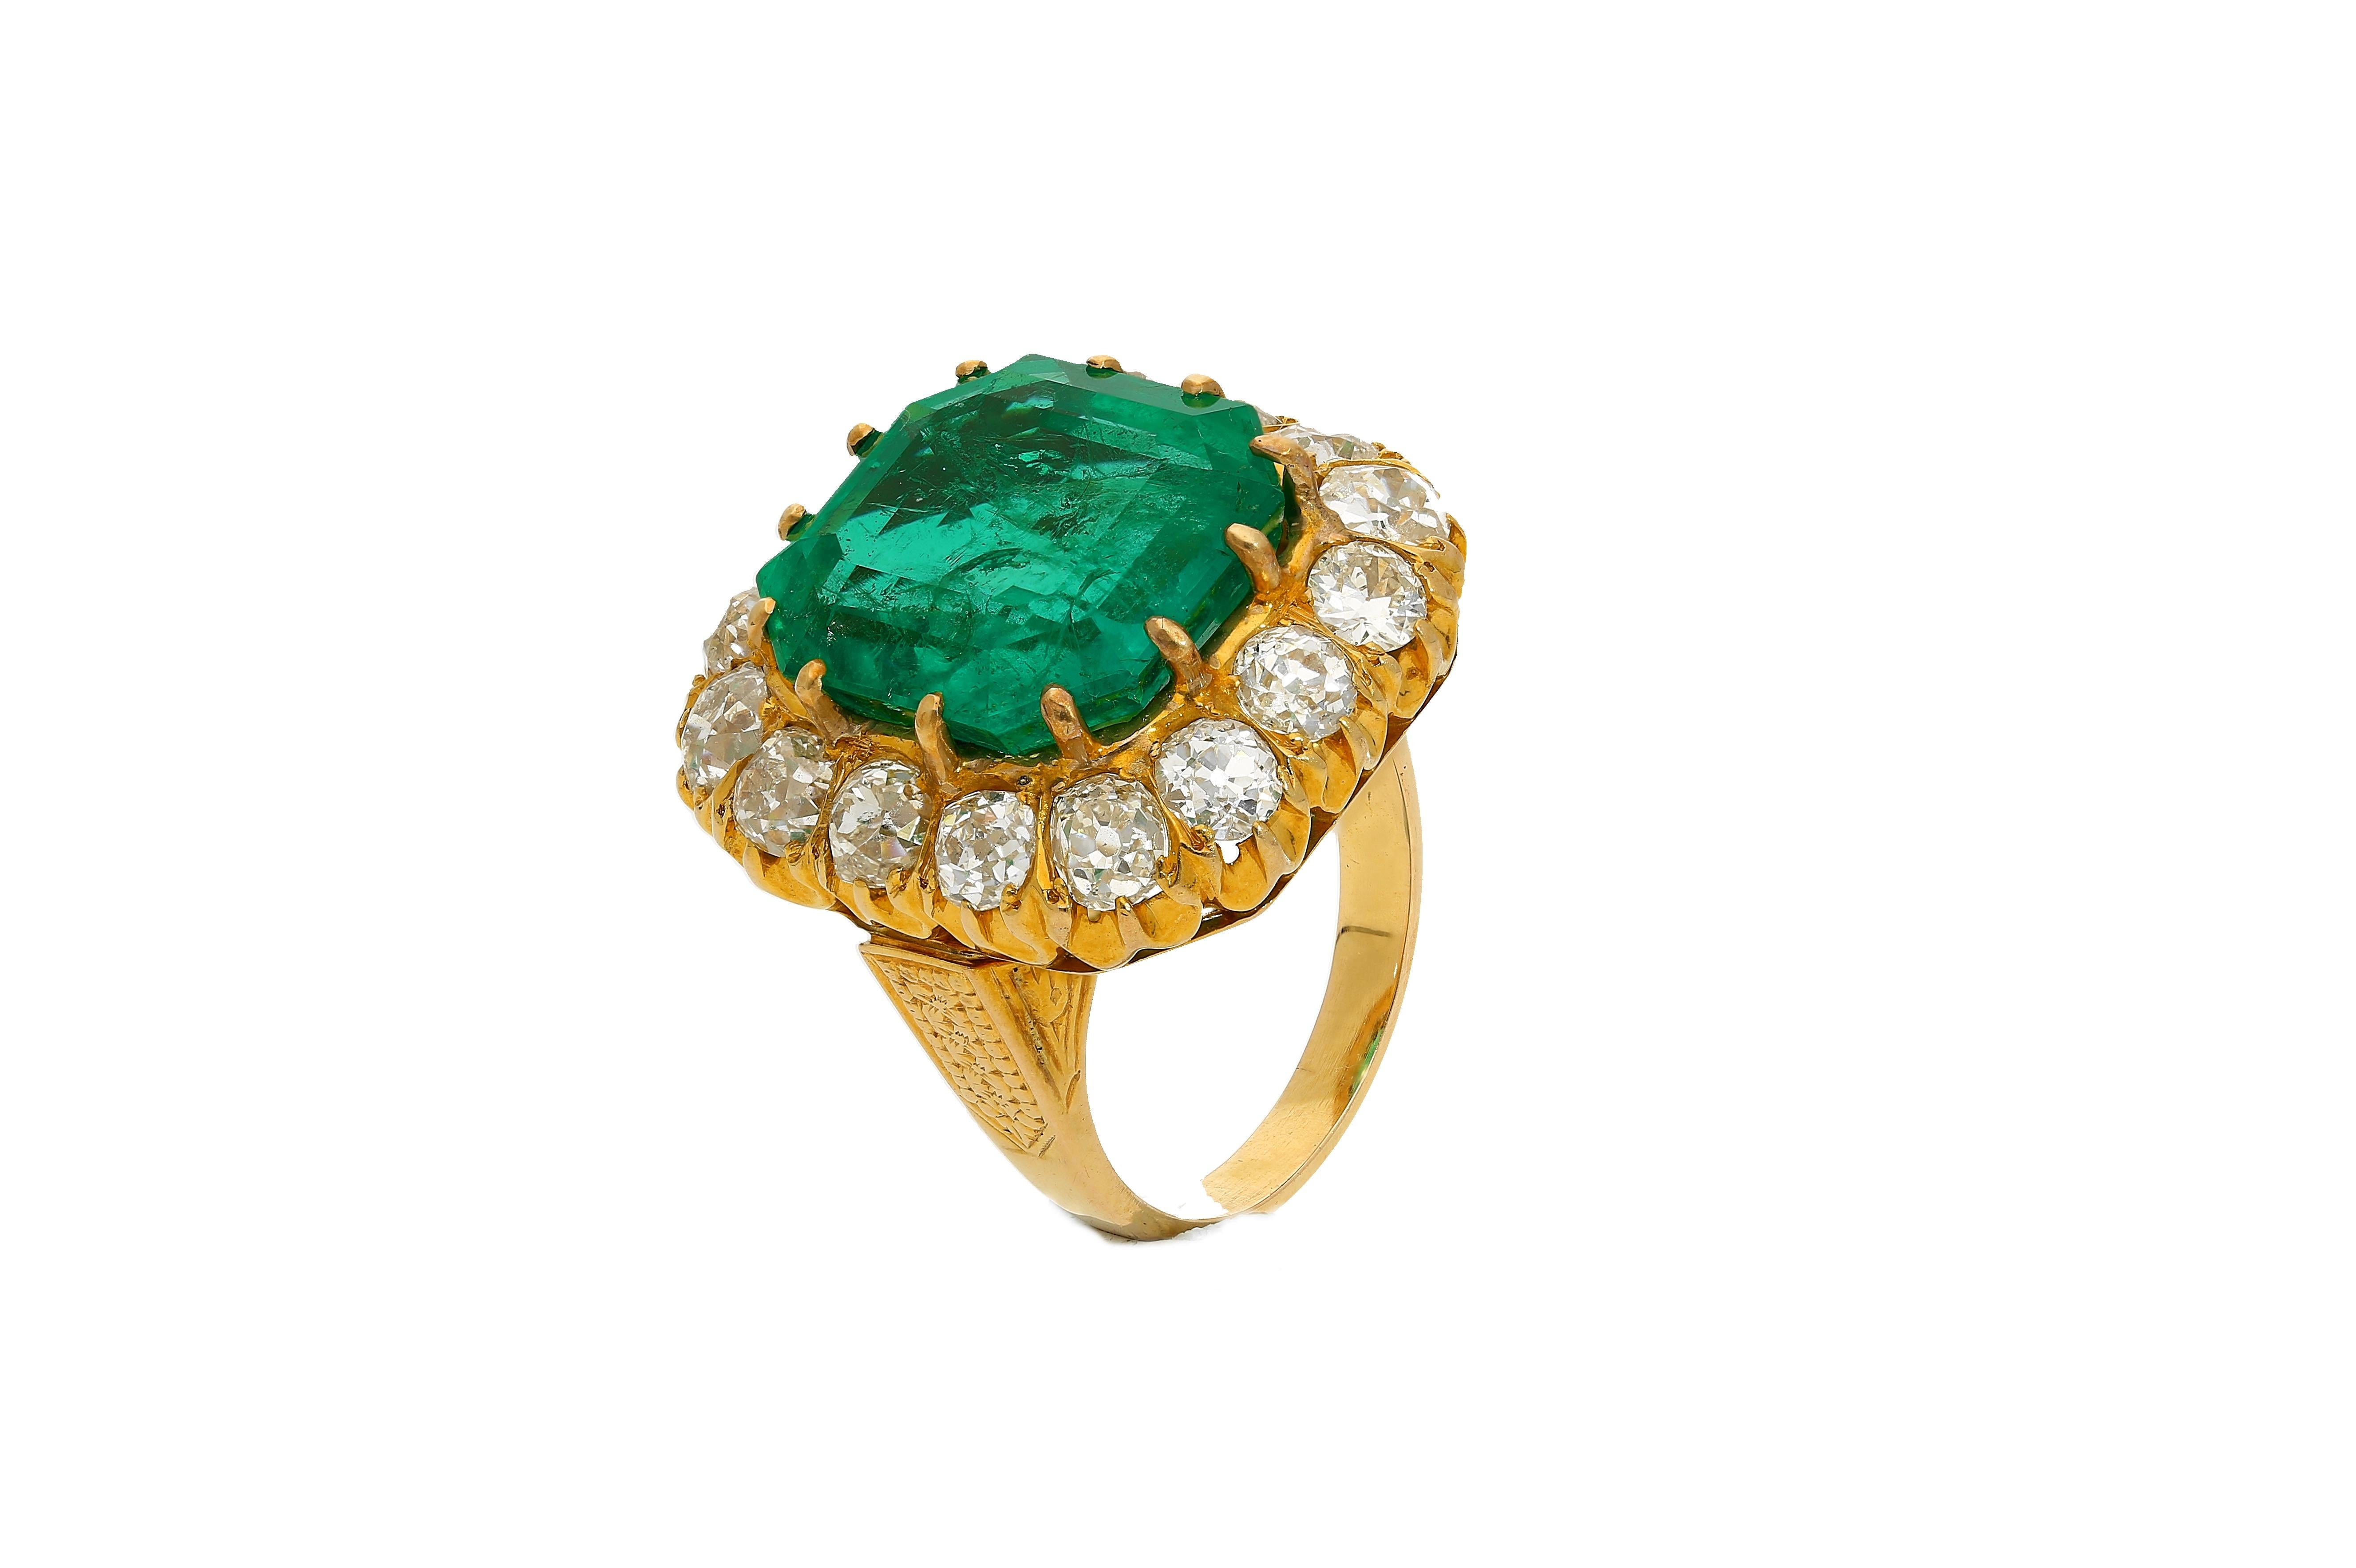 GRS certified natural Colombian Emerald mounted in a vintage art deco ring setting. This legendary Emerald is adorned with a 16 old European cut diamond halo. An Emerald of this size and color is a truly unique find considering its insignificant oil